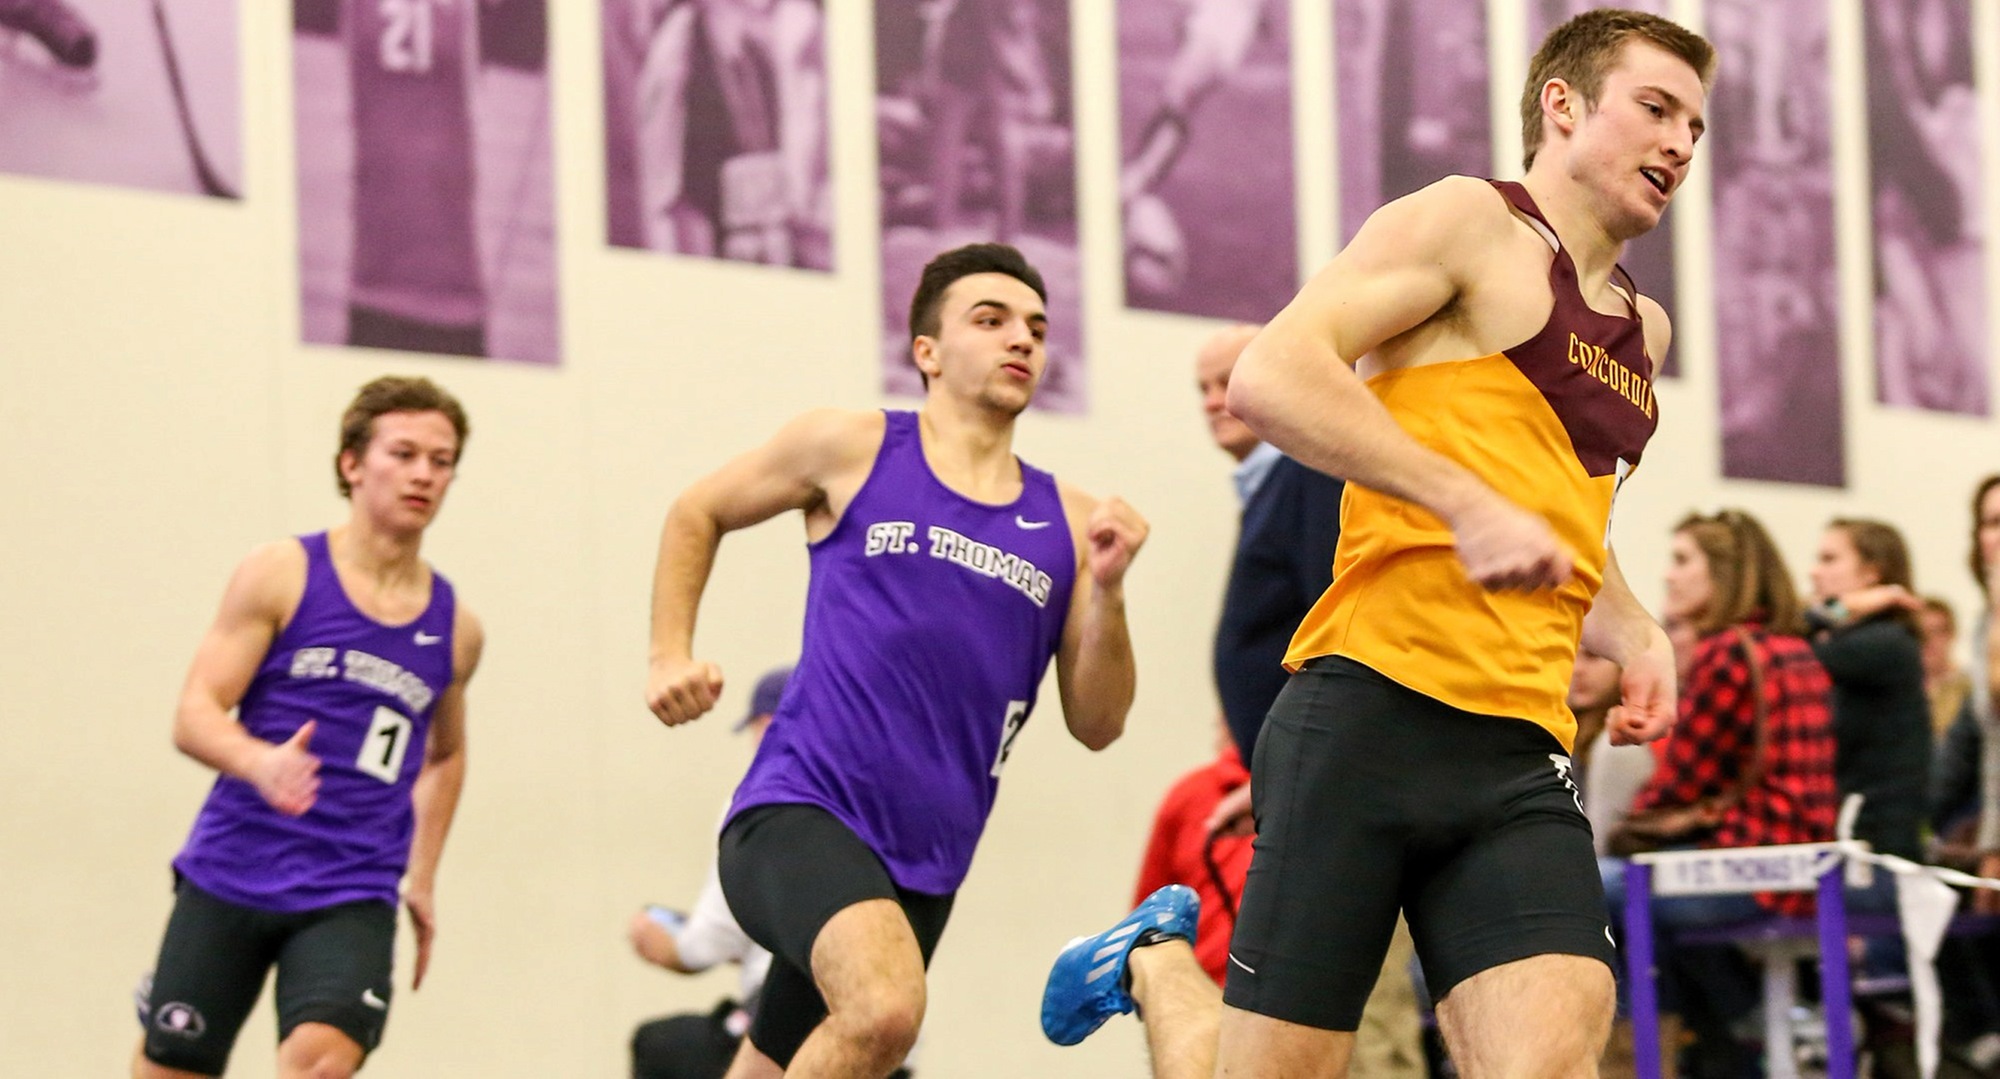 Sophomore David Supinski races to breaking his own school record in the 600 meters on Saturday at the MIAC Meet. (Photo courtesy of Nathan Lodermeier)